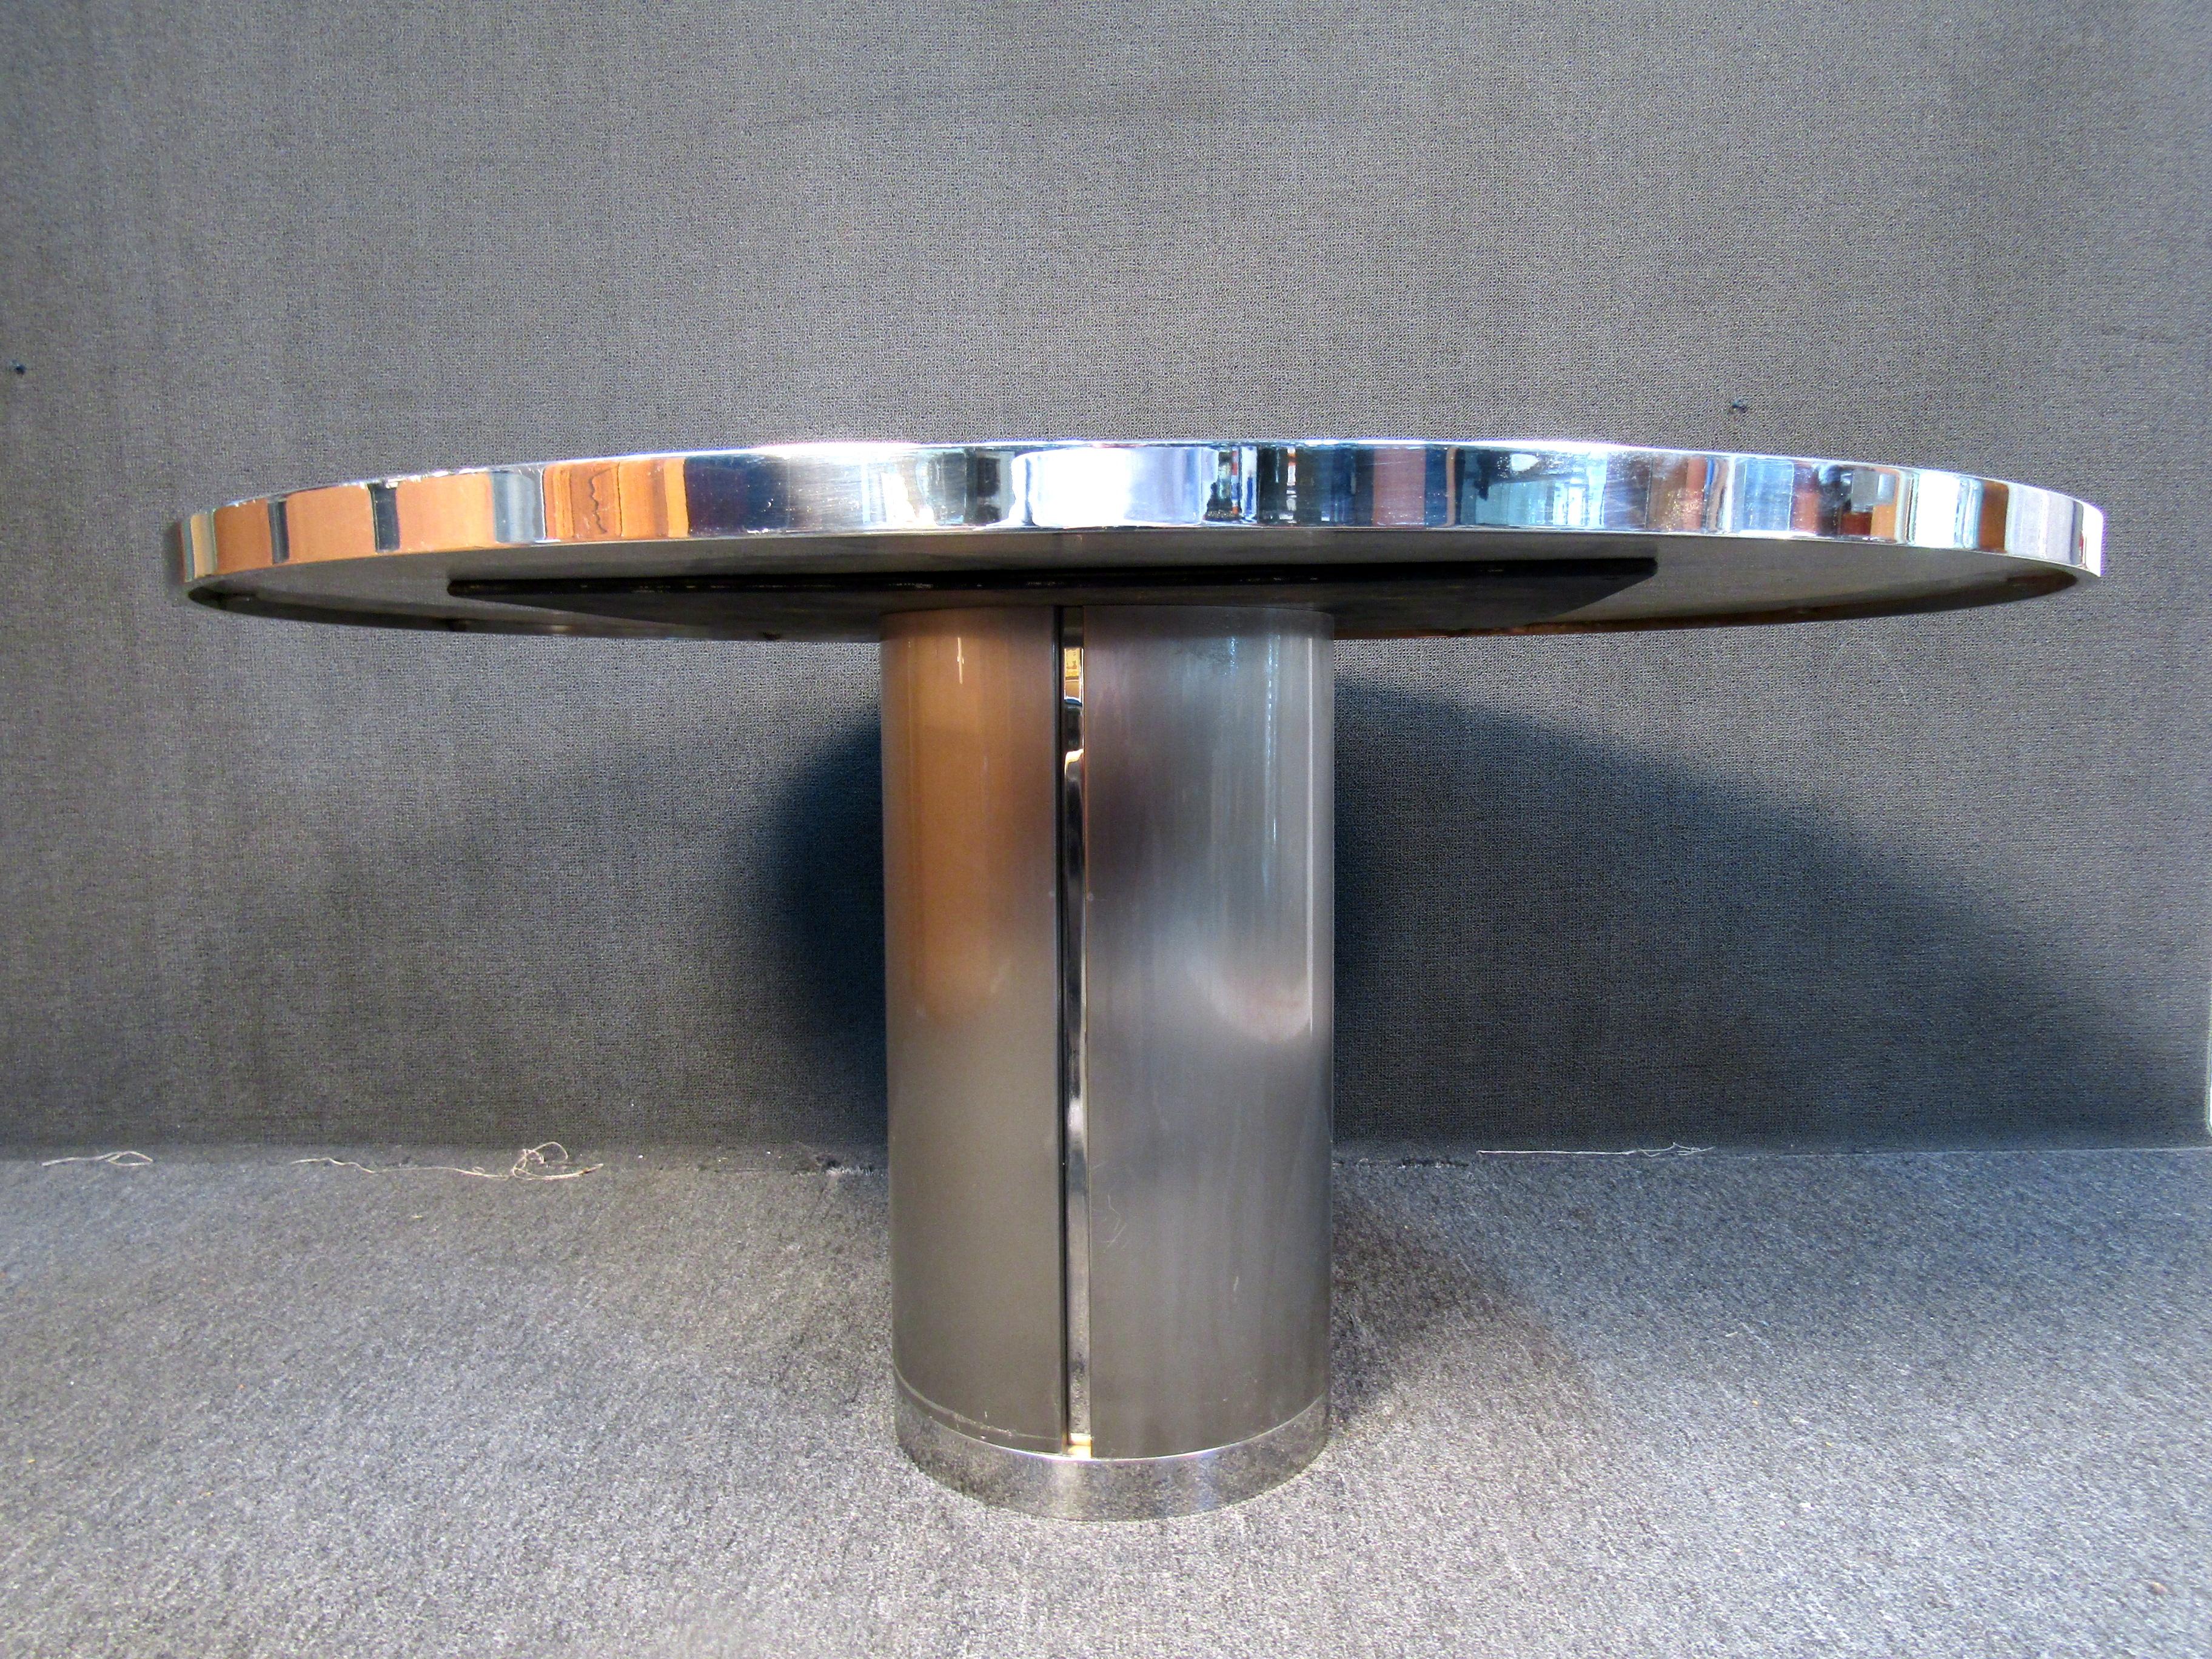 A unique piece featuring all metal and chrome appearance with a cylindrical base. A one of a kind table that would be the topic of conversation in any living space. Please confirm item location with seller (NY/NJ).